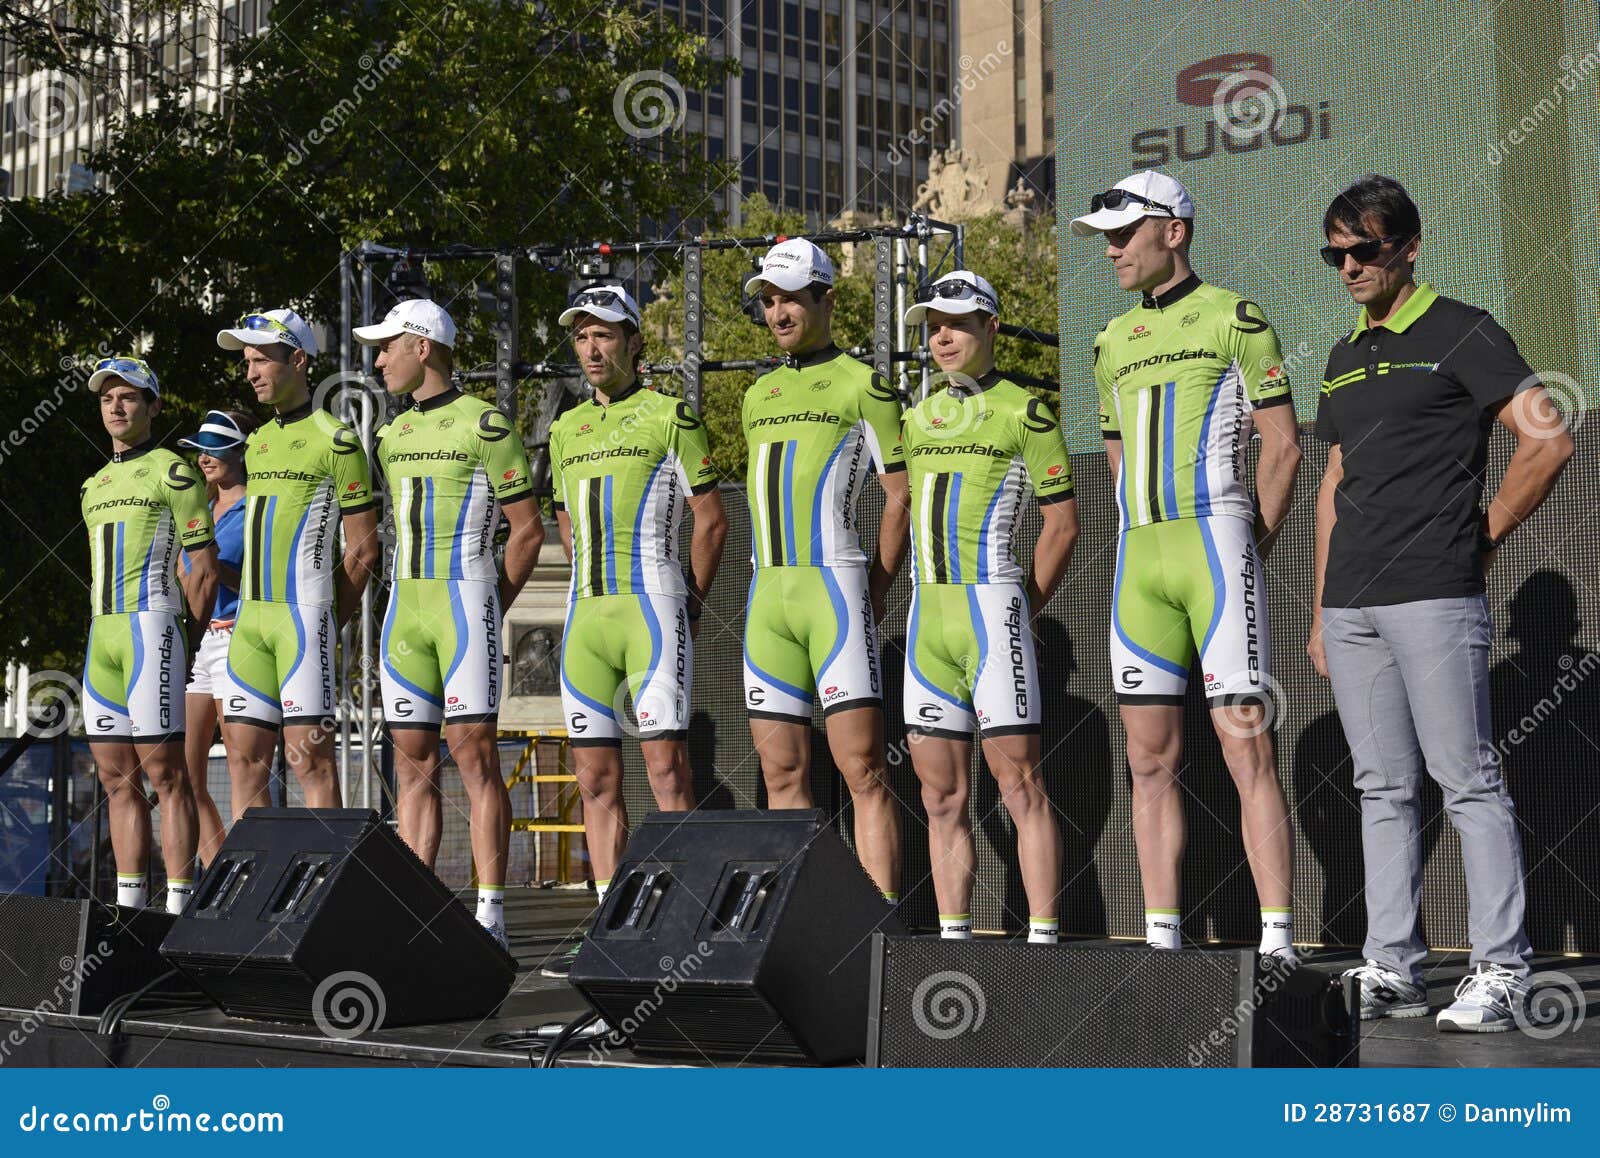 cannondale cycling team